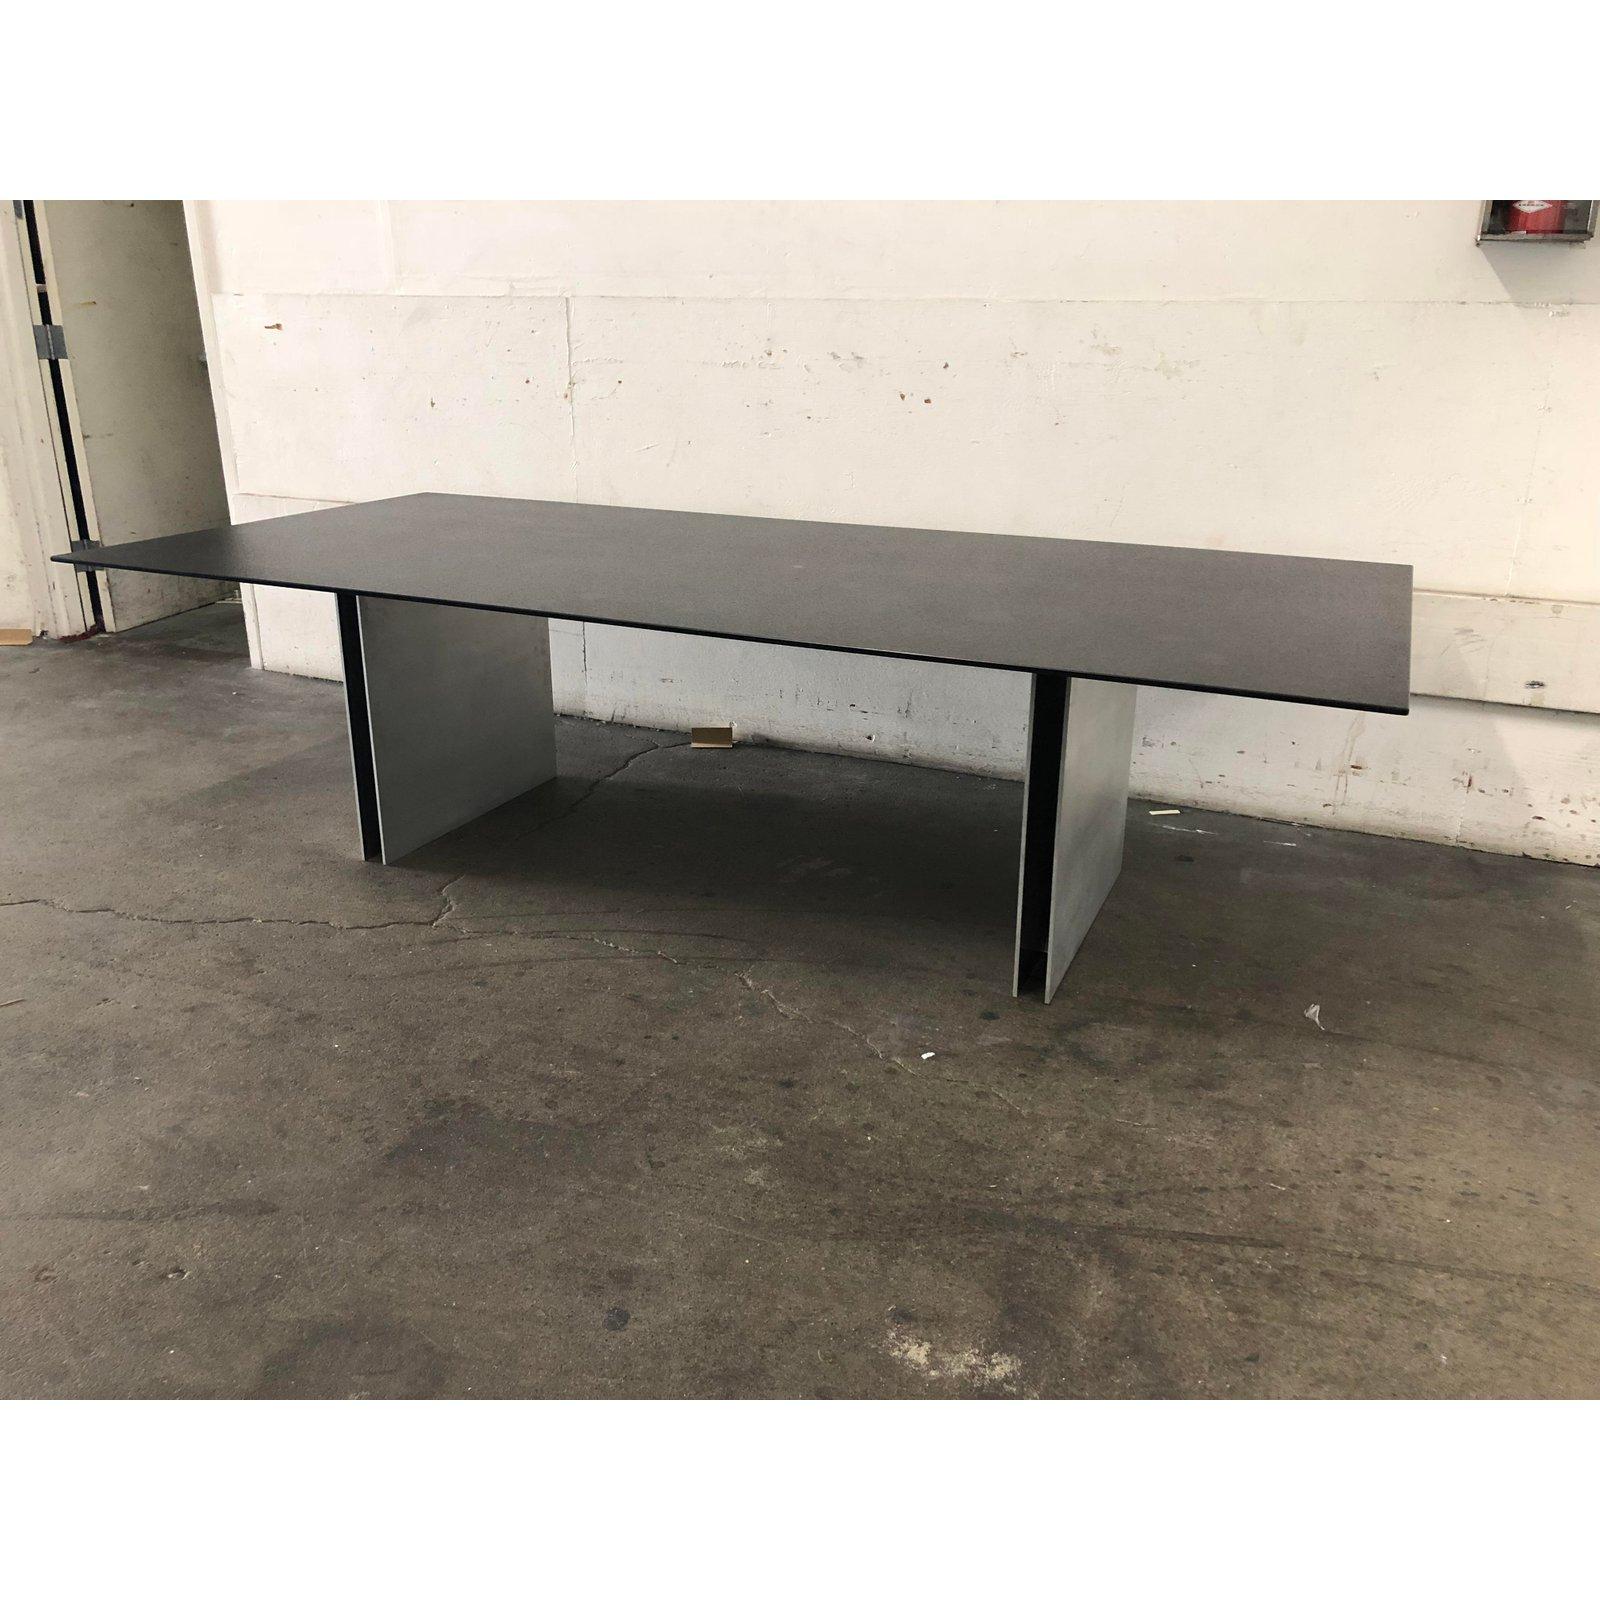 A modern and Industrial style dining table. A textured black top rests on double reinforced twin steel pedestals. The combination of faux stone and industrial steel materials combined with simple geometry and razor sharp lines make this piece a